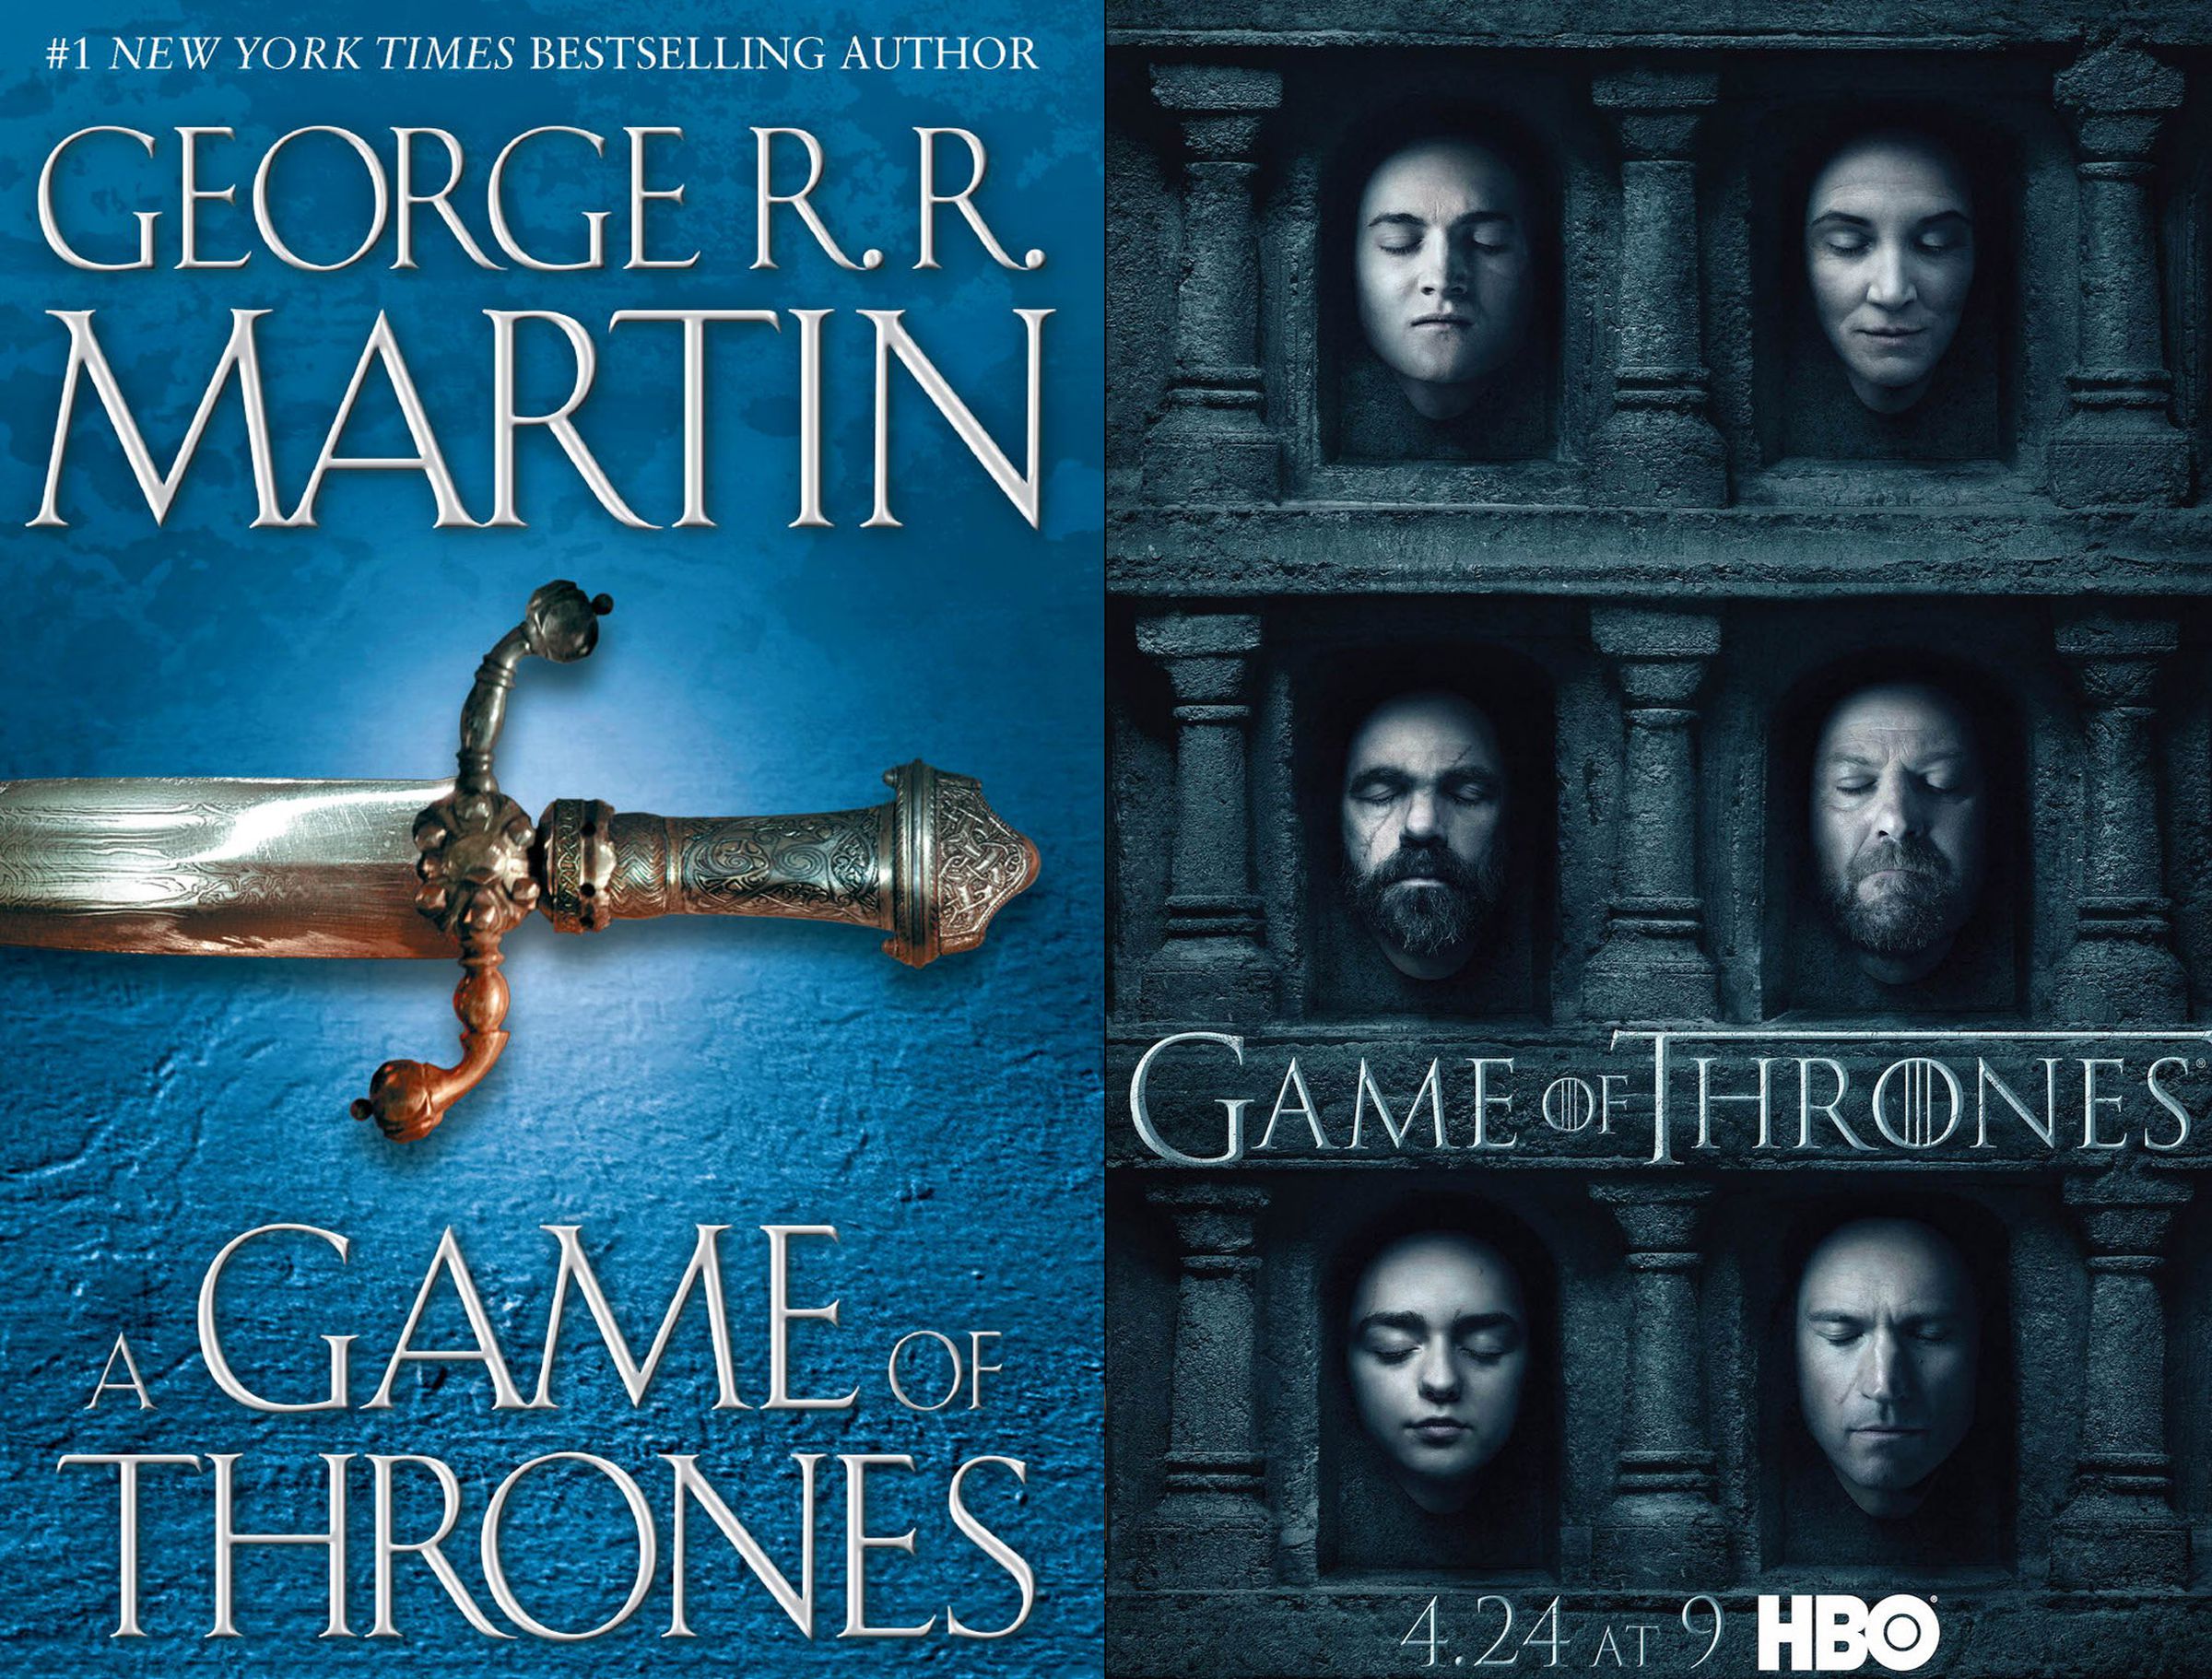 Game of Thrones by George R.R. Martin and the series from HBO